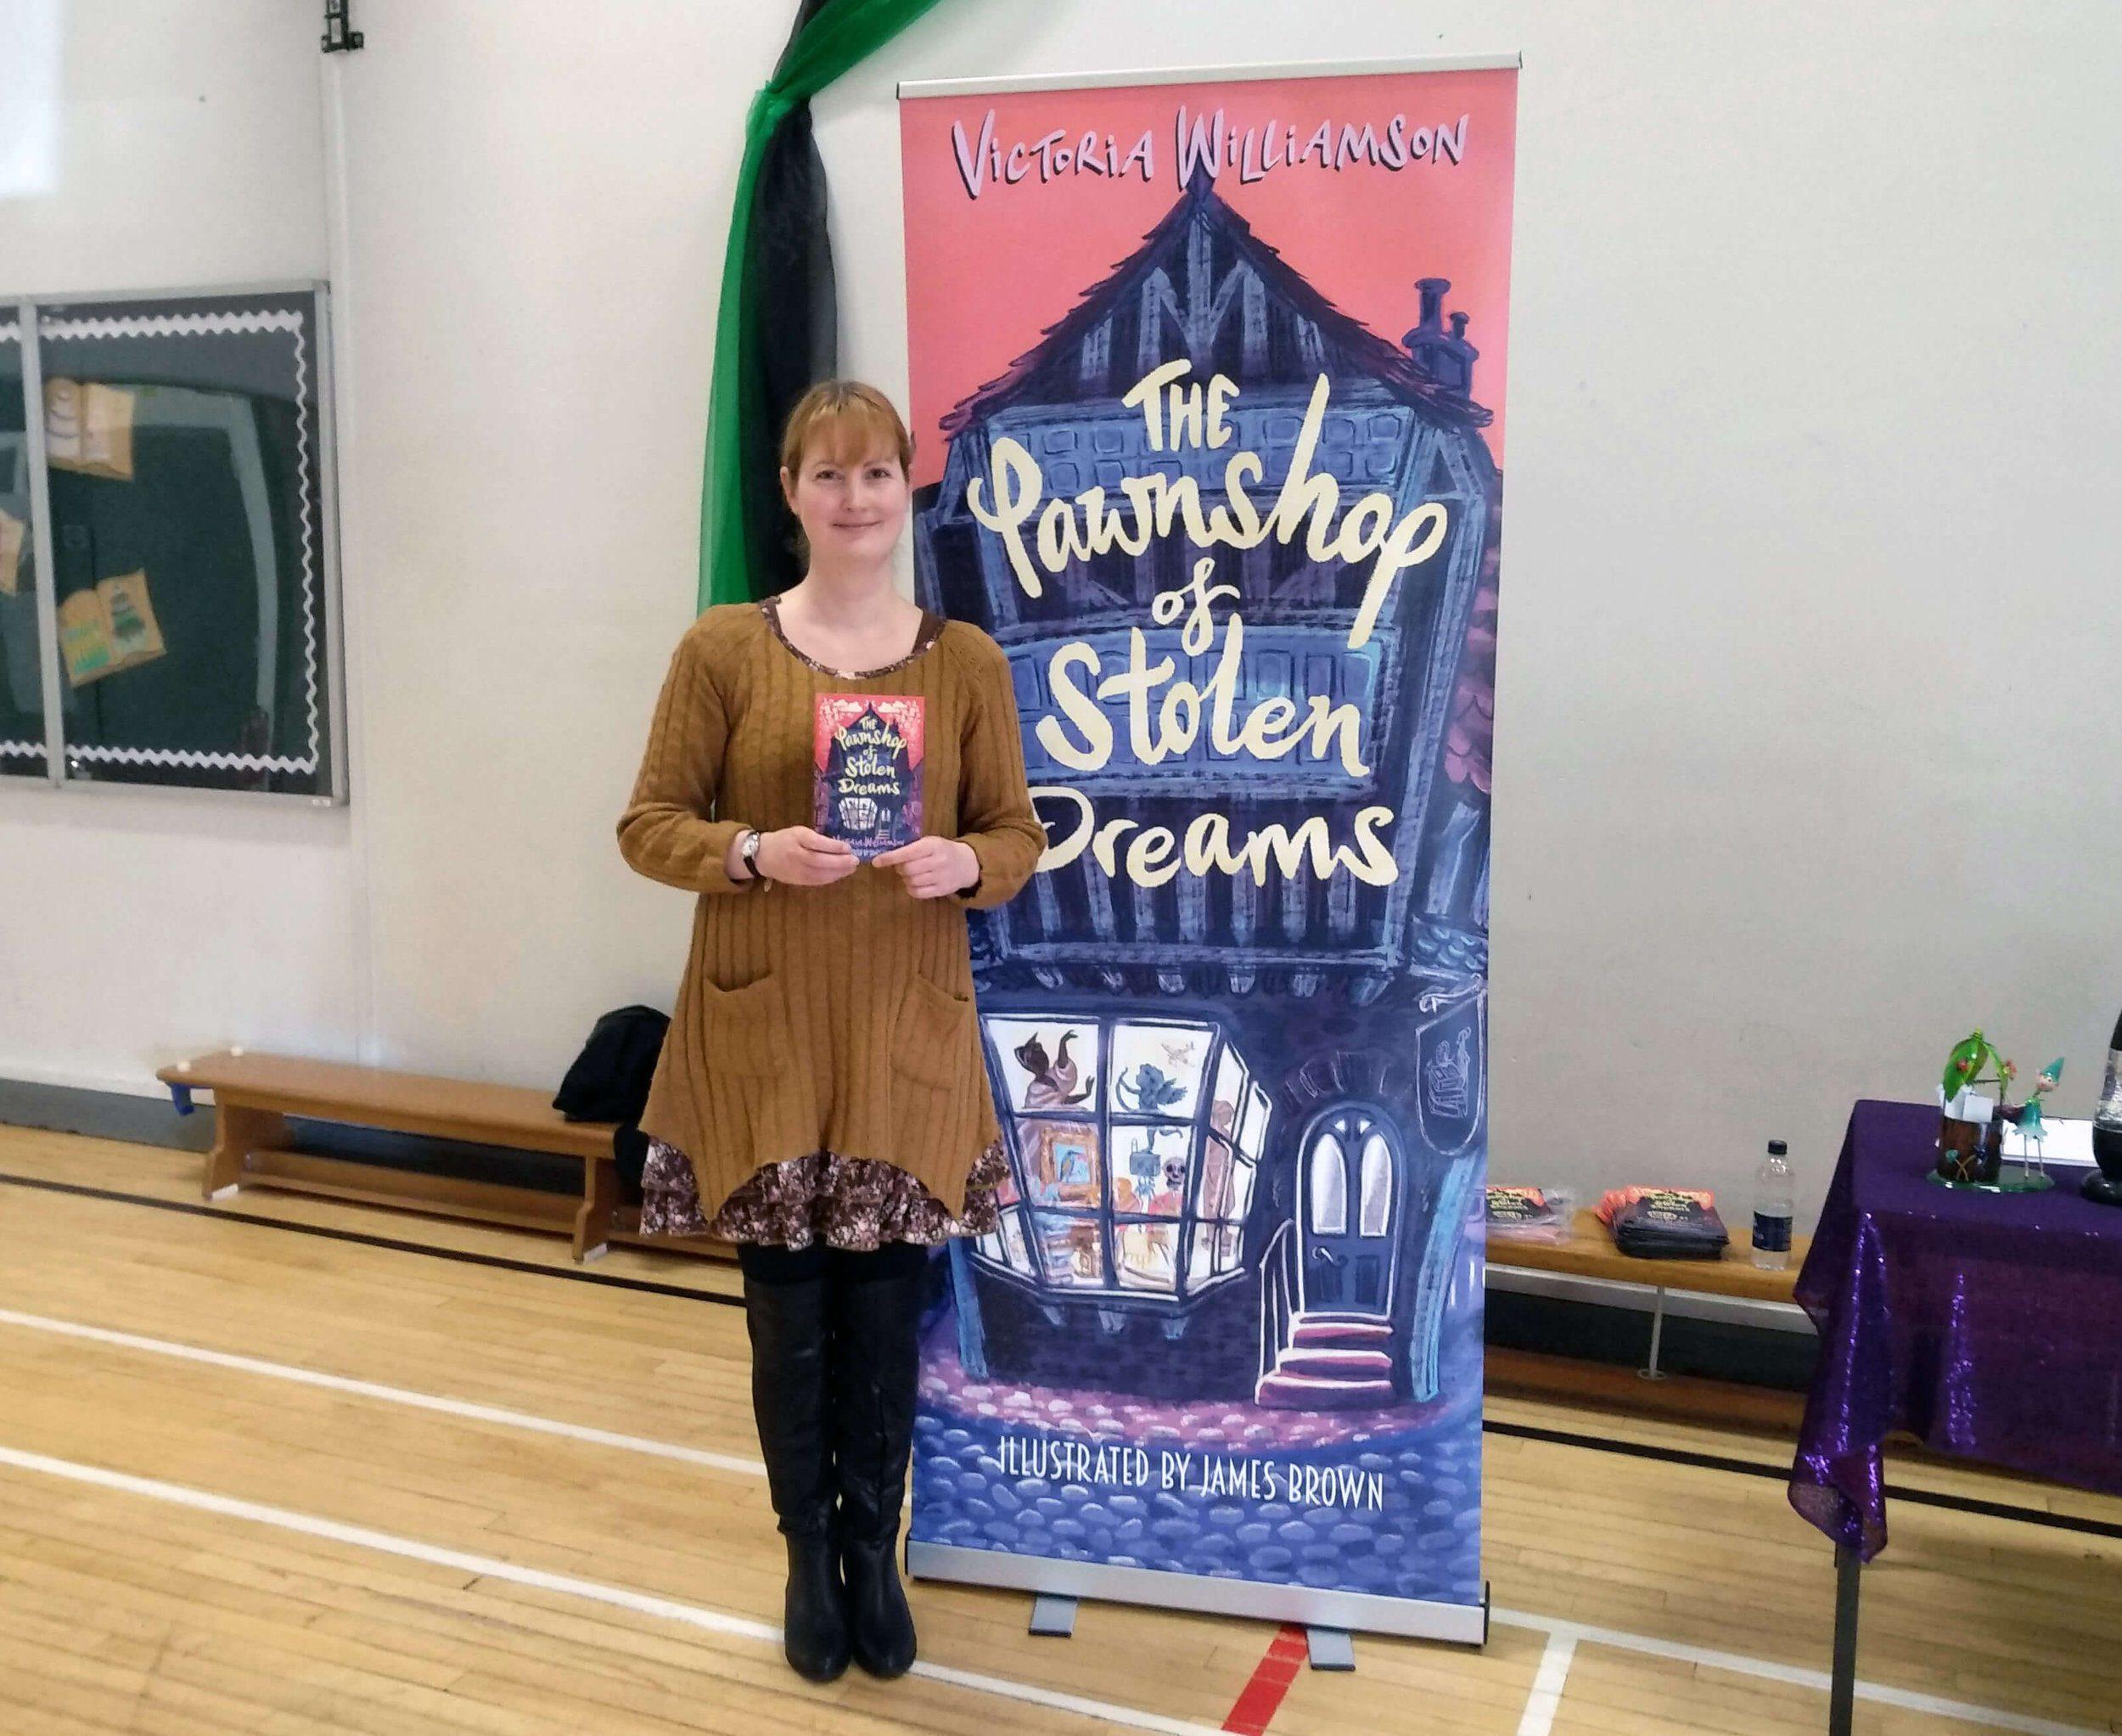 The Pawnshop of Stolen Dreams author Victoria Williamson holds her book next to a large banner promoting her book.